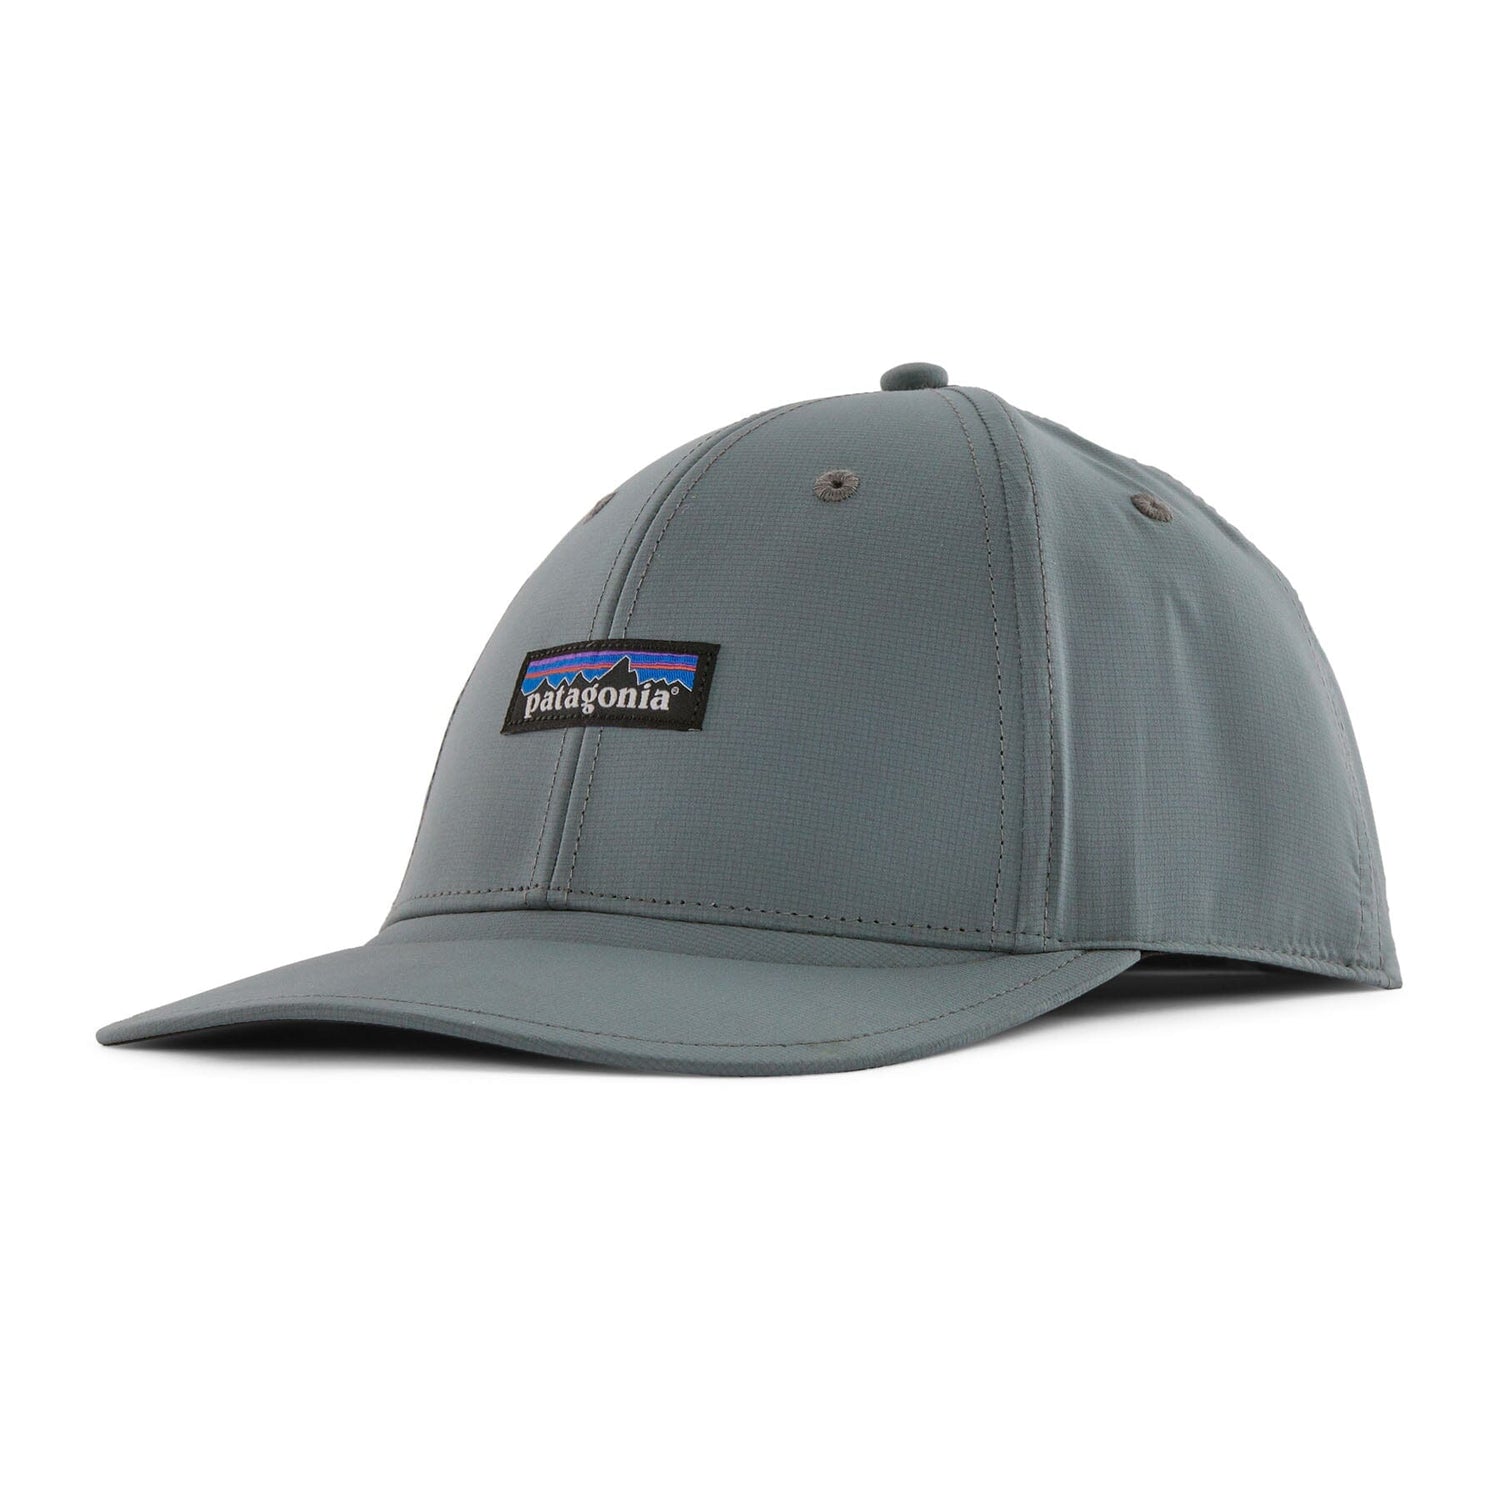 Patagonia Airshed Cap - 100% Recycled Polyester & NetPlus® Nouveau Green Headwear